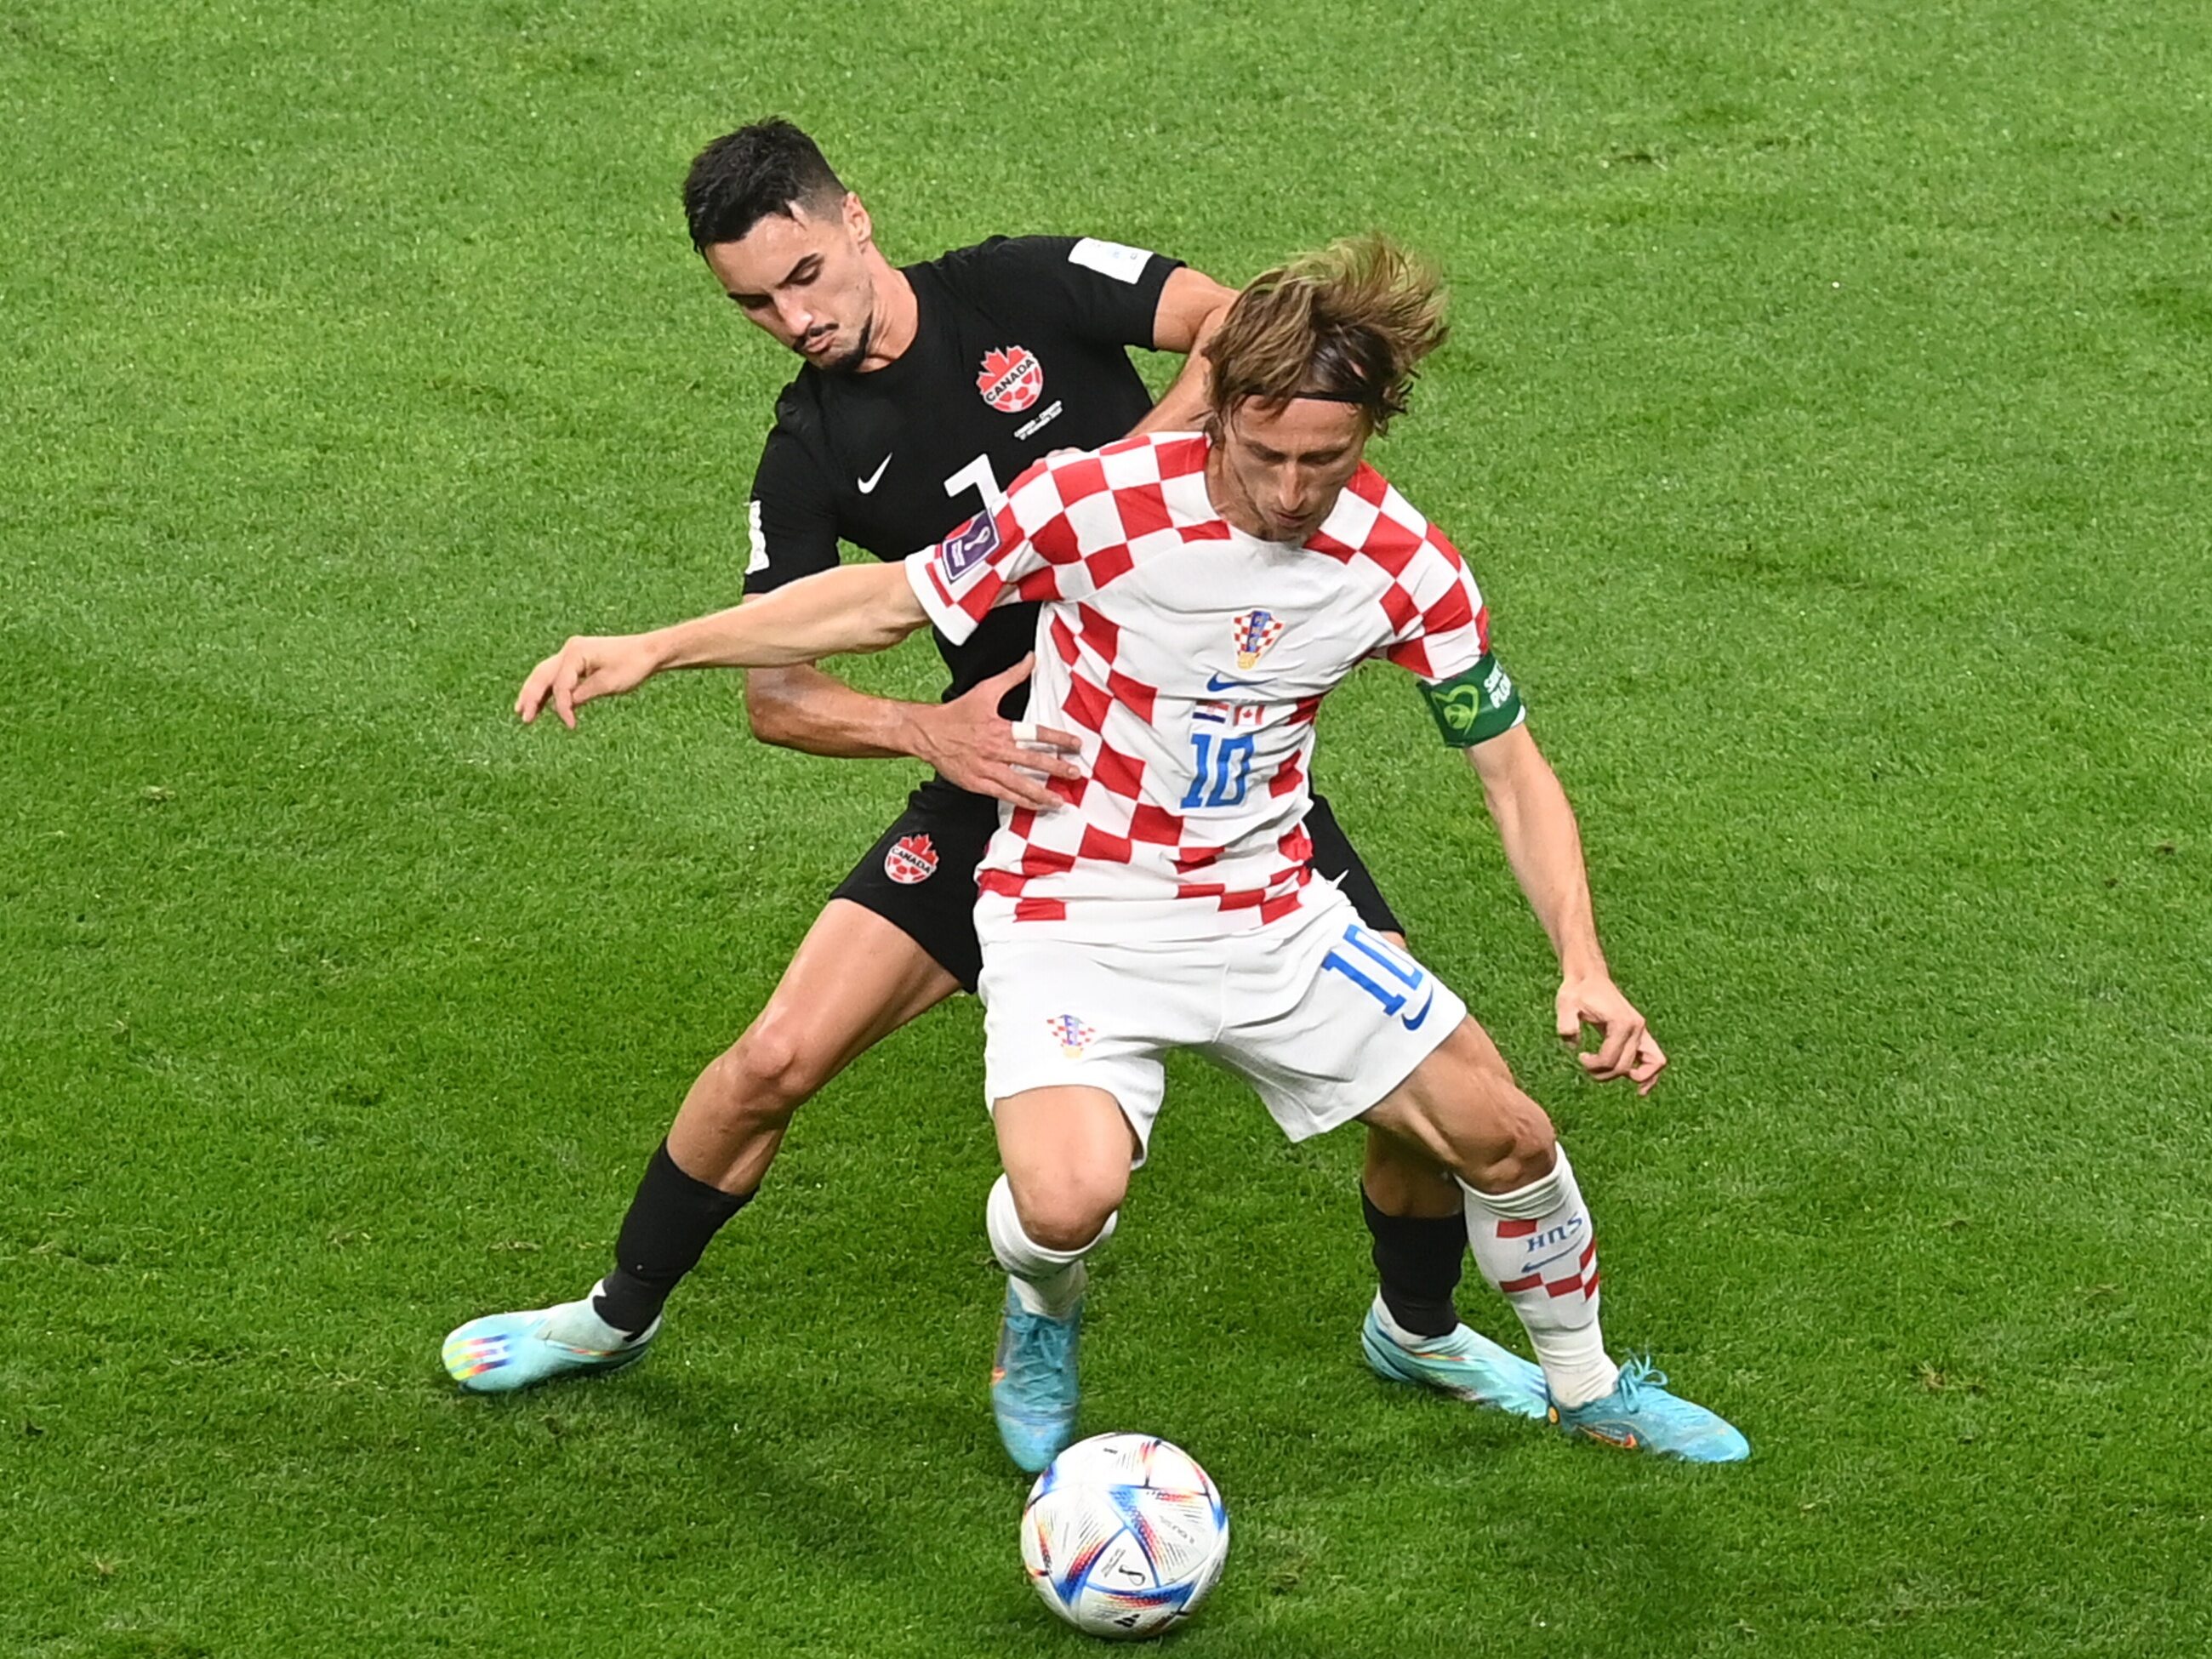 They turned the game around in a beautiful way.  After the Croatia-Canada match, they lost their chances of promotion